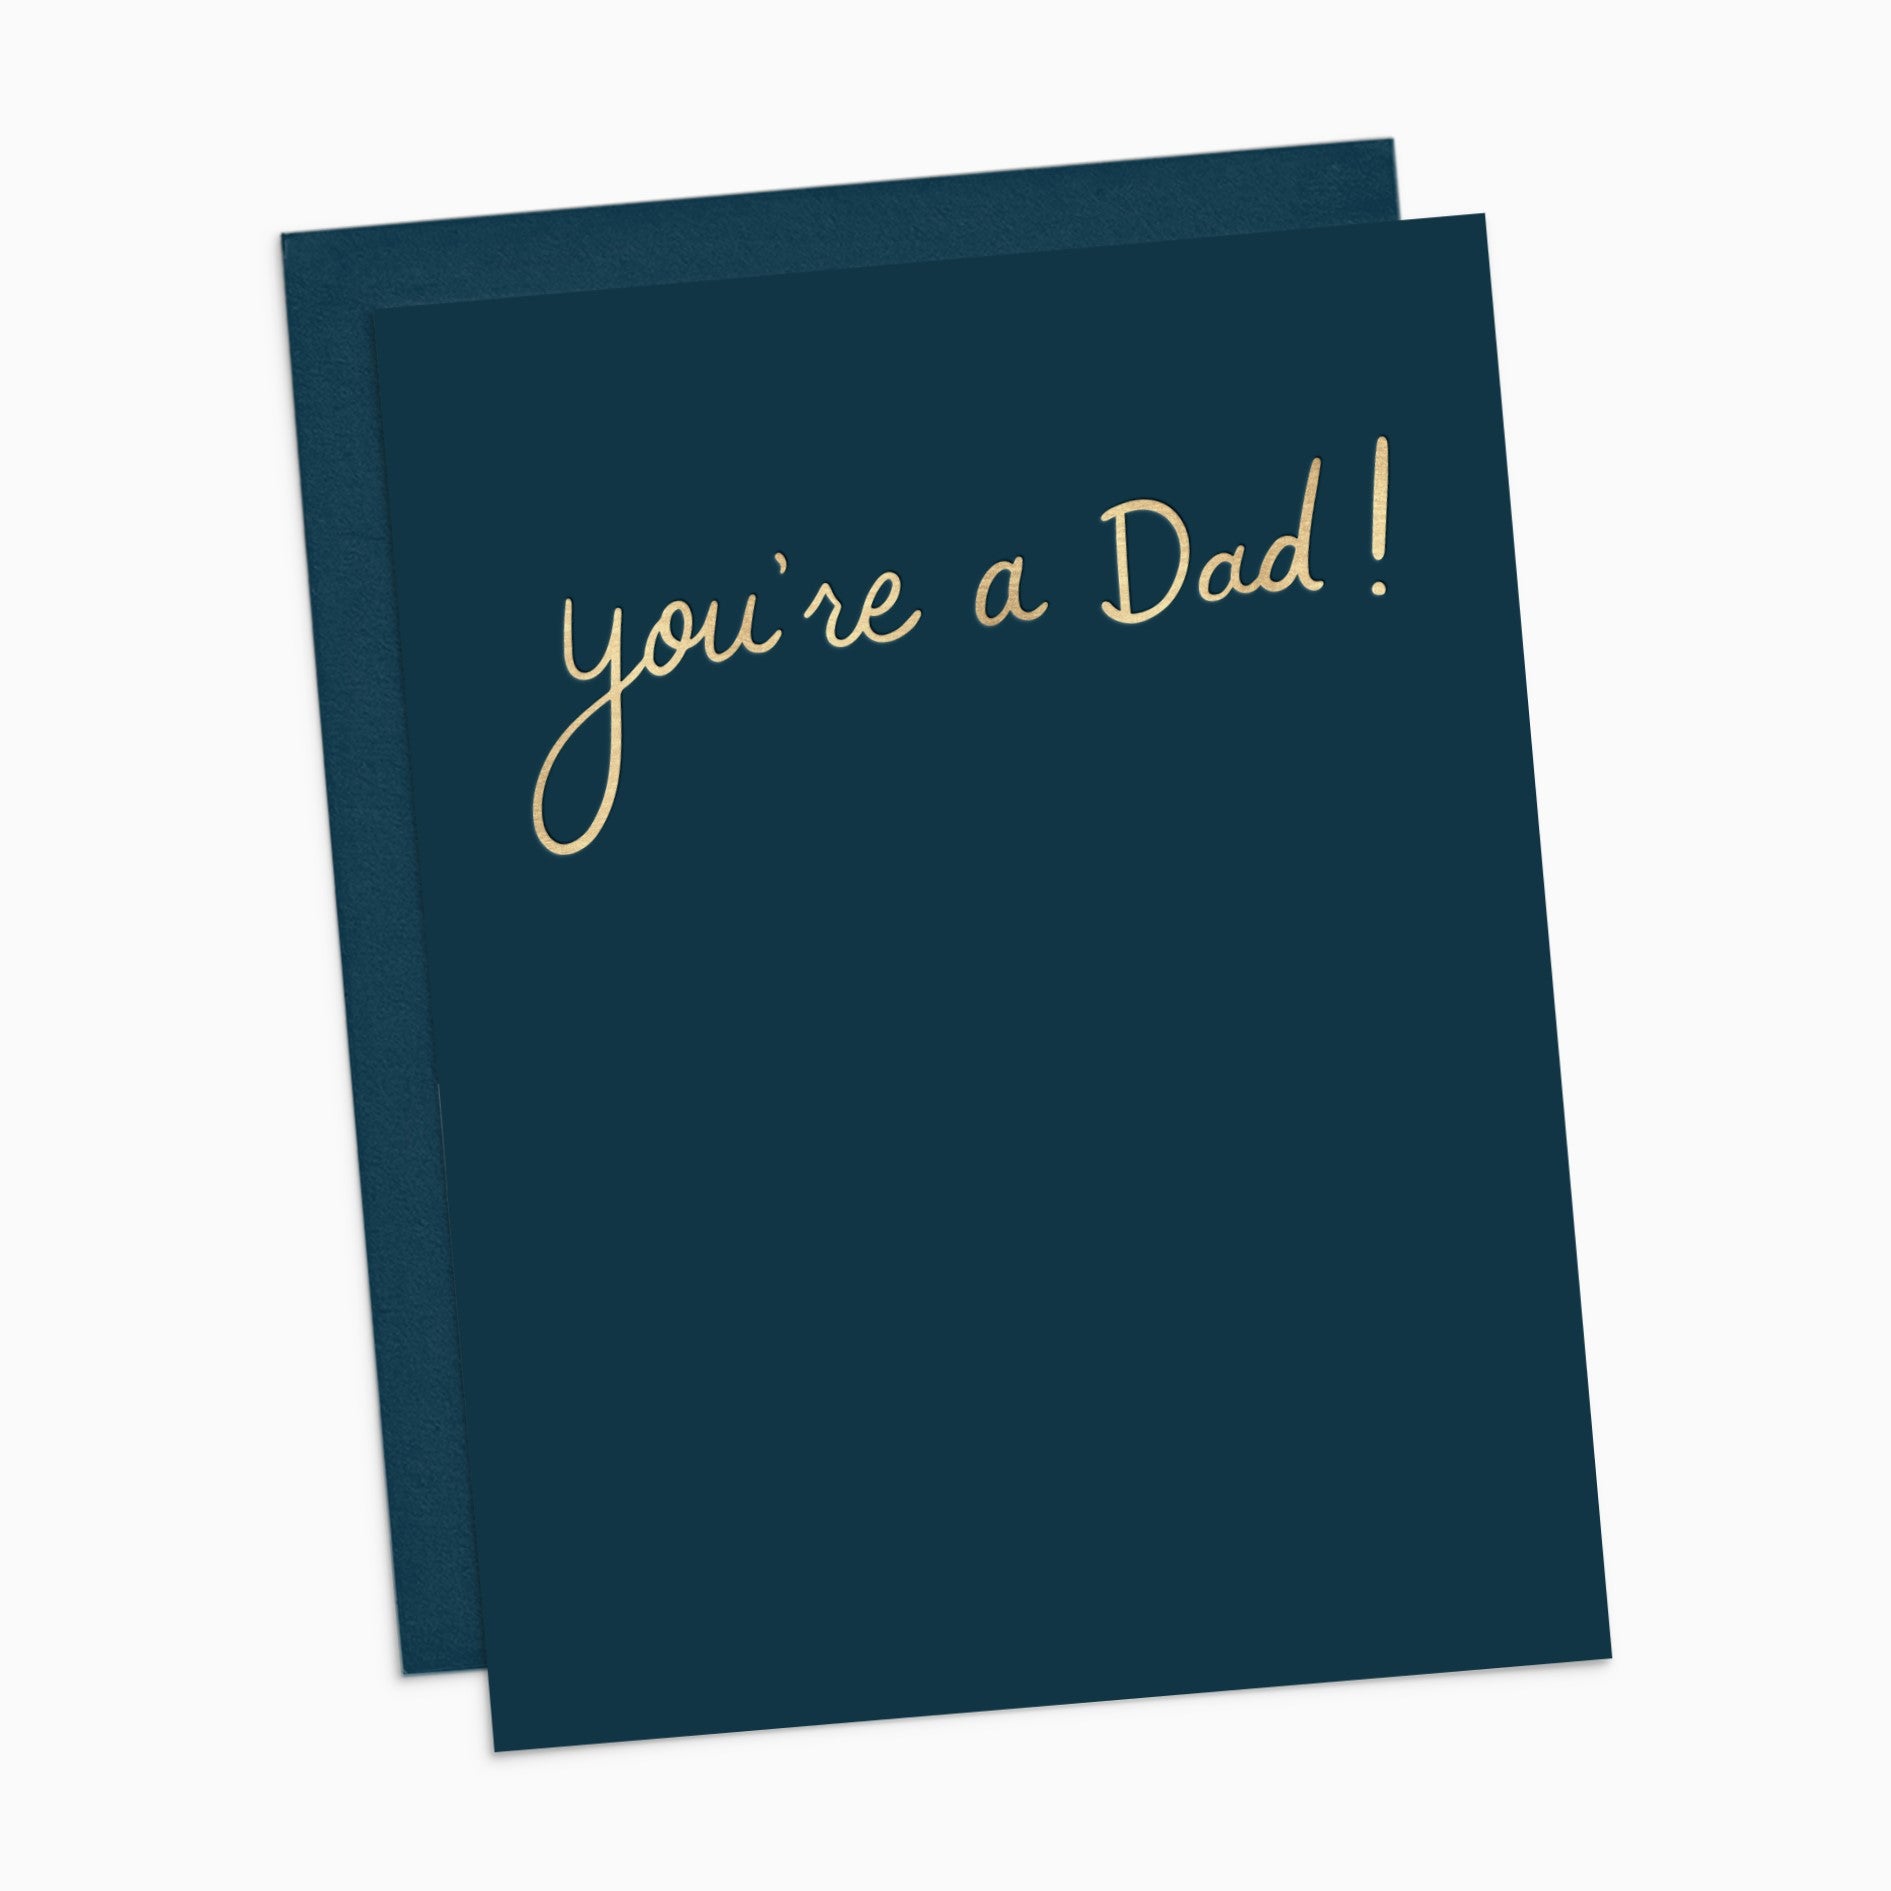 You're a Dad! Card